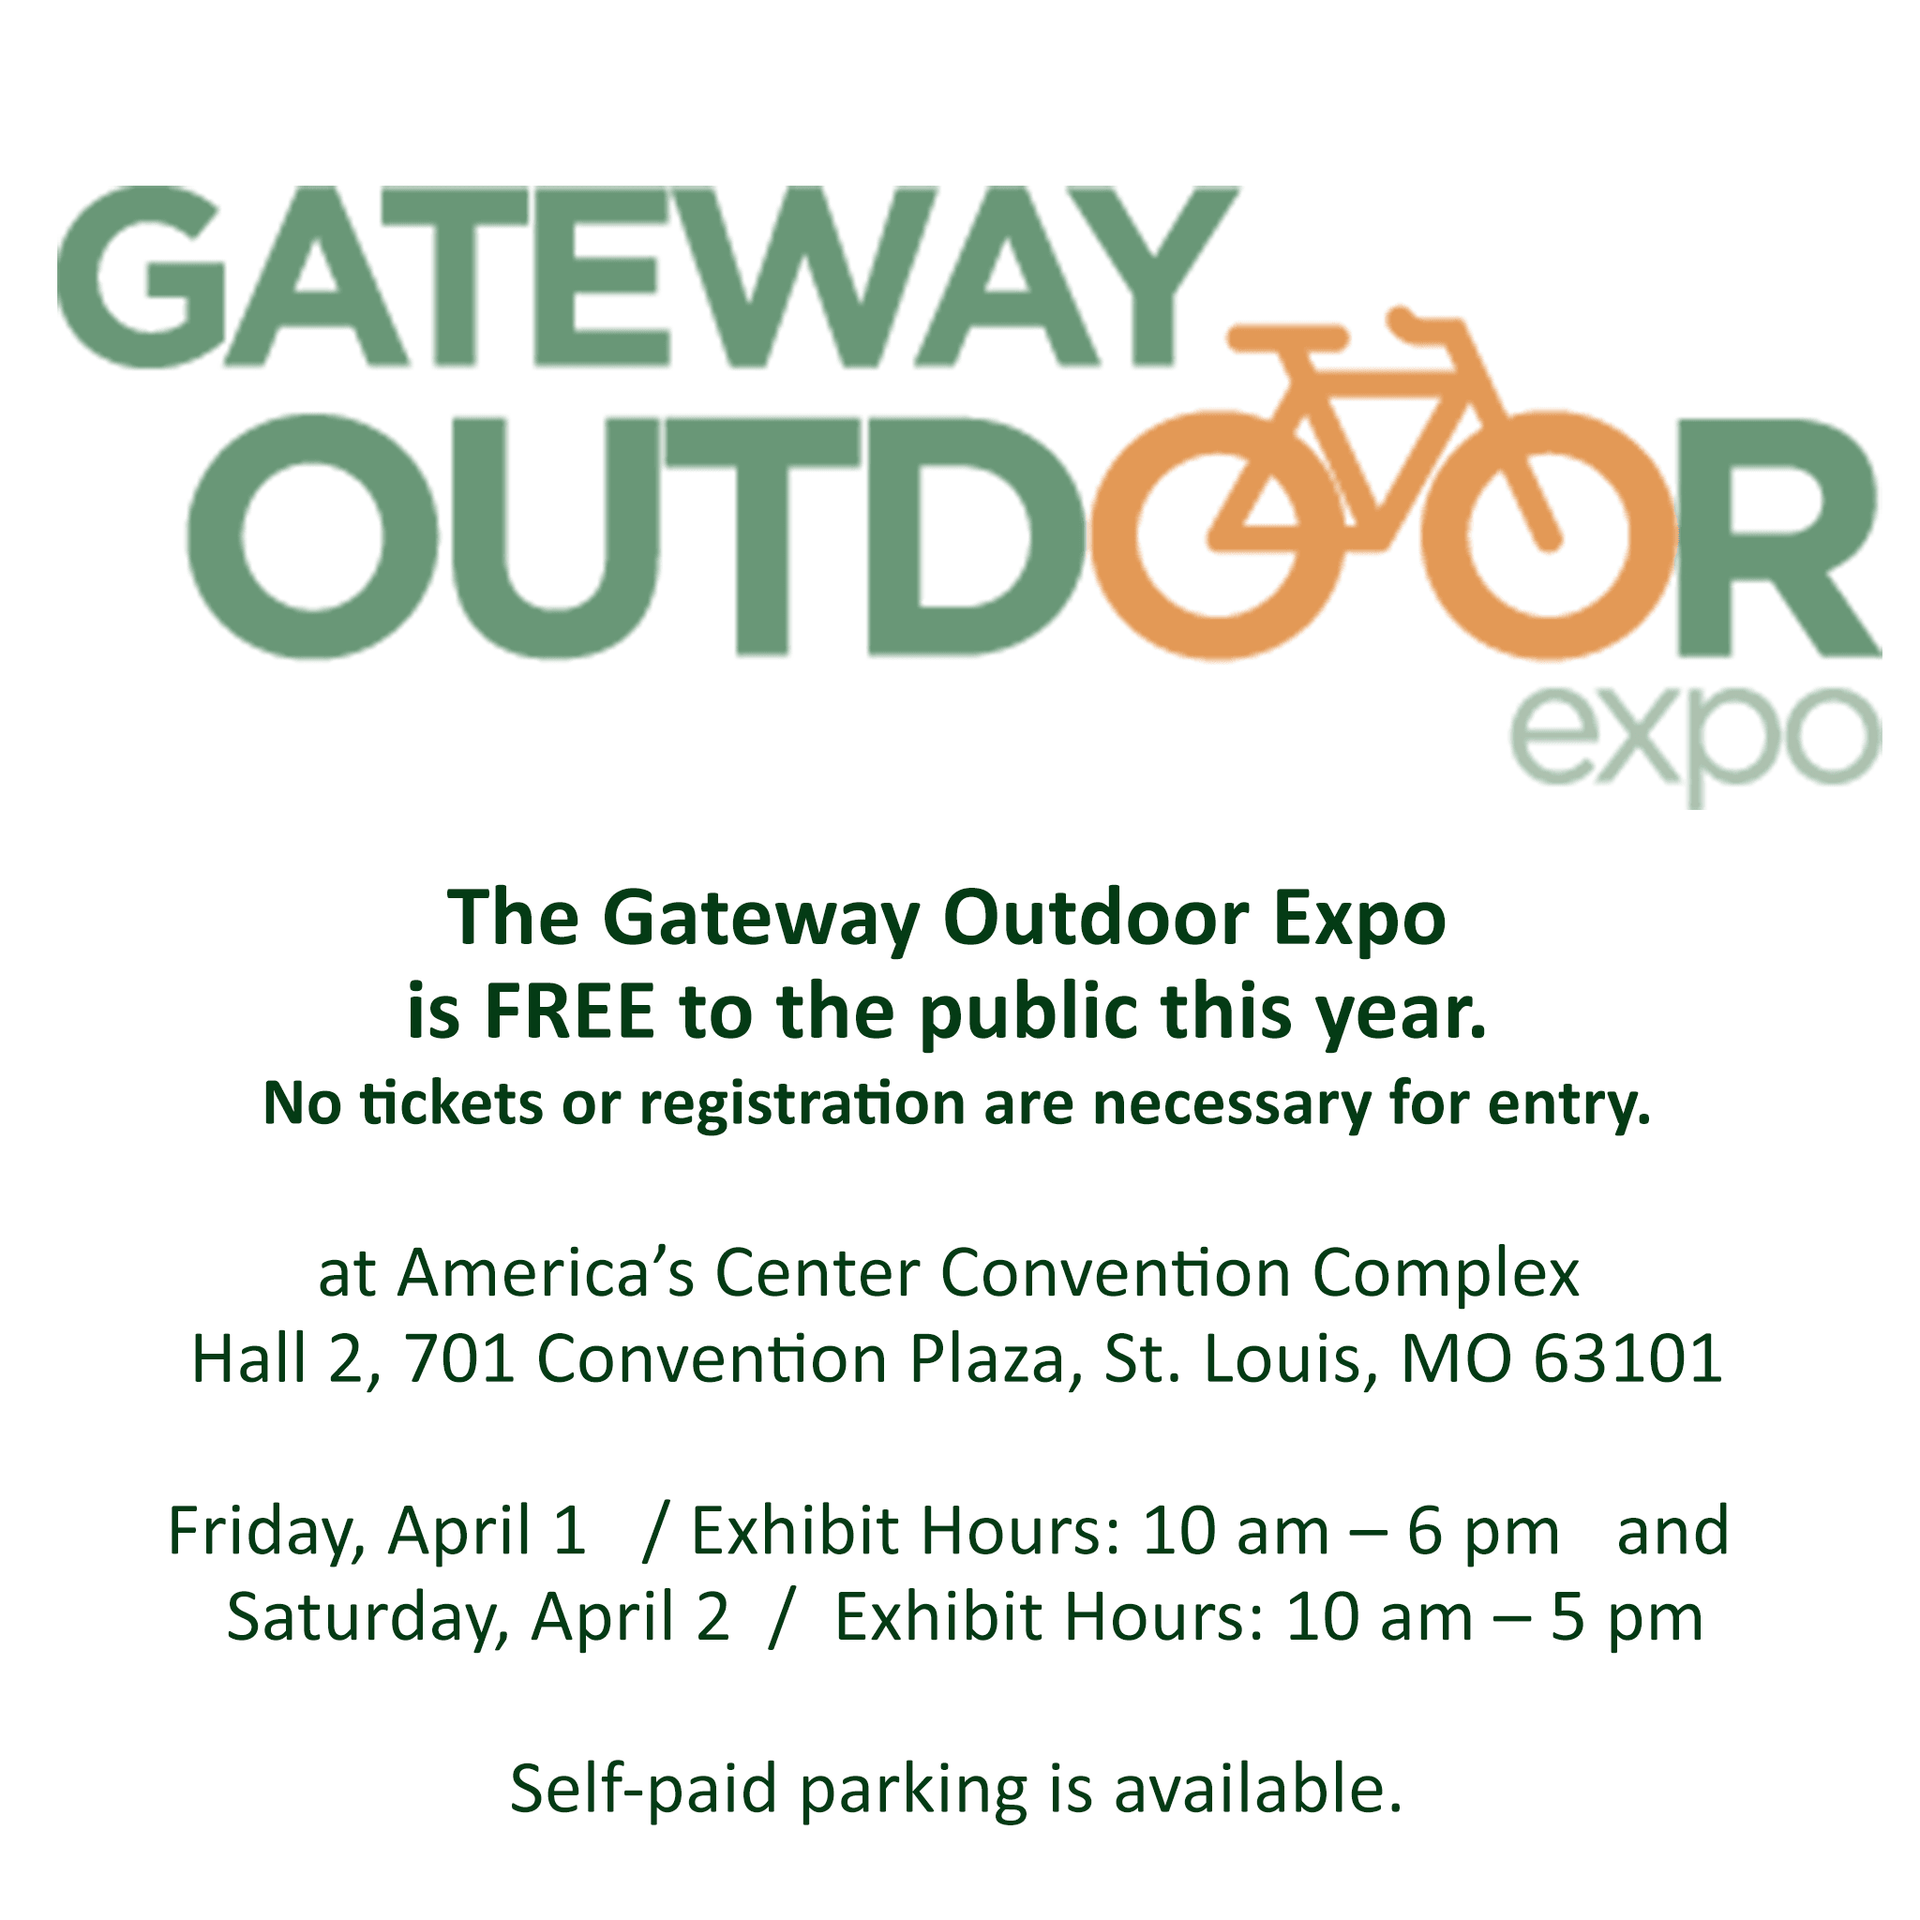 Outdoor Consumer Show and Cultural Gathering April 1-2 / St. Louis - Wild Routed